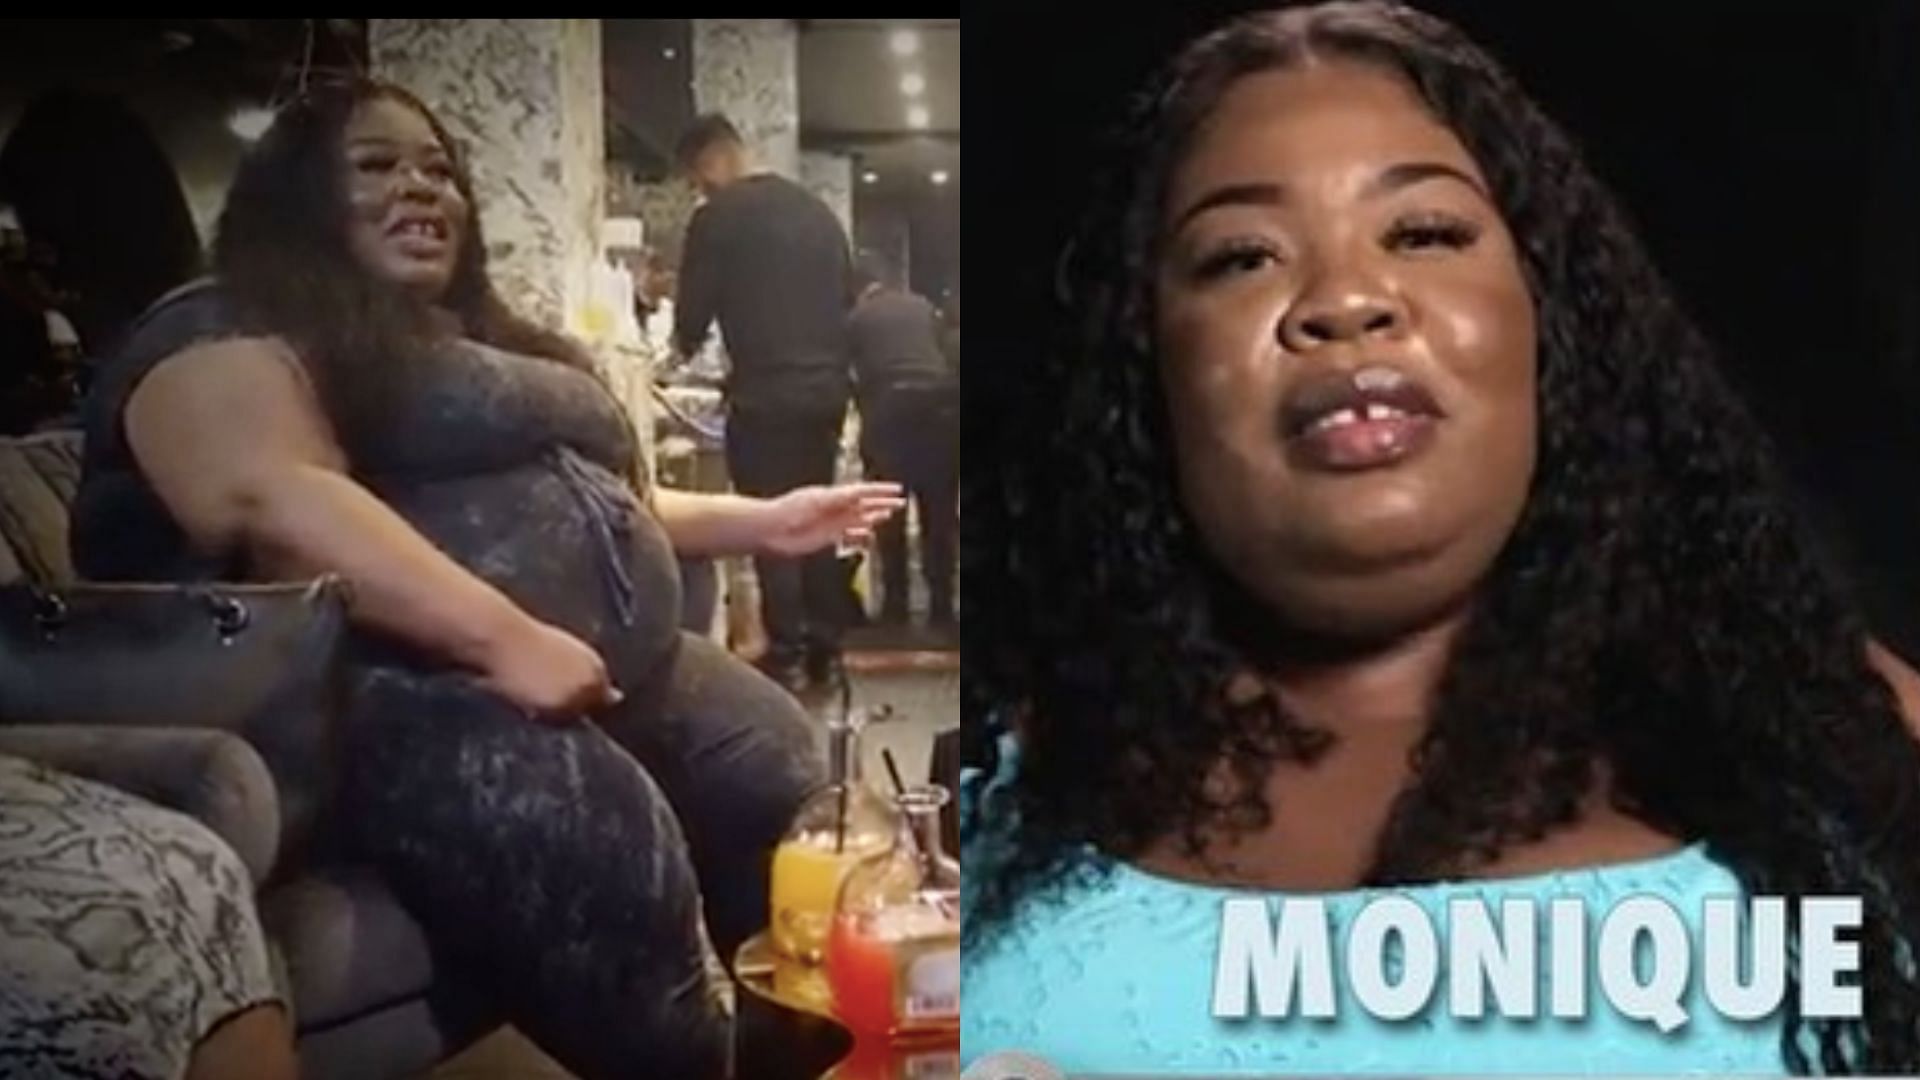 Did monique from love after lockup lose weight